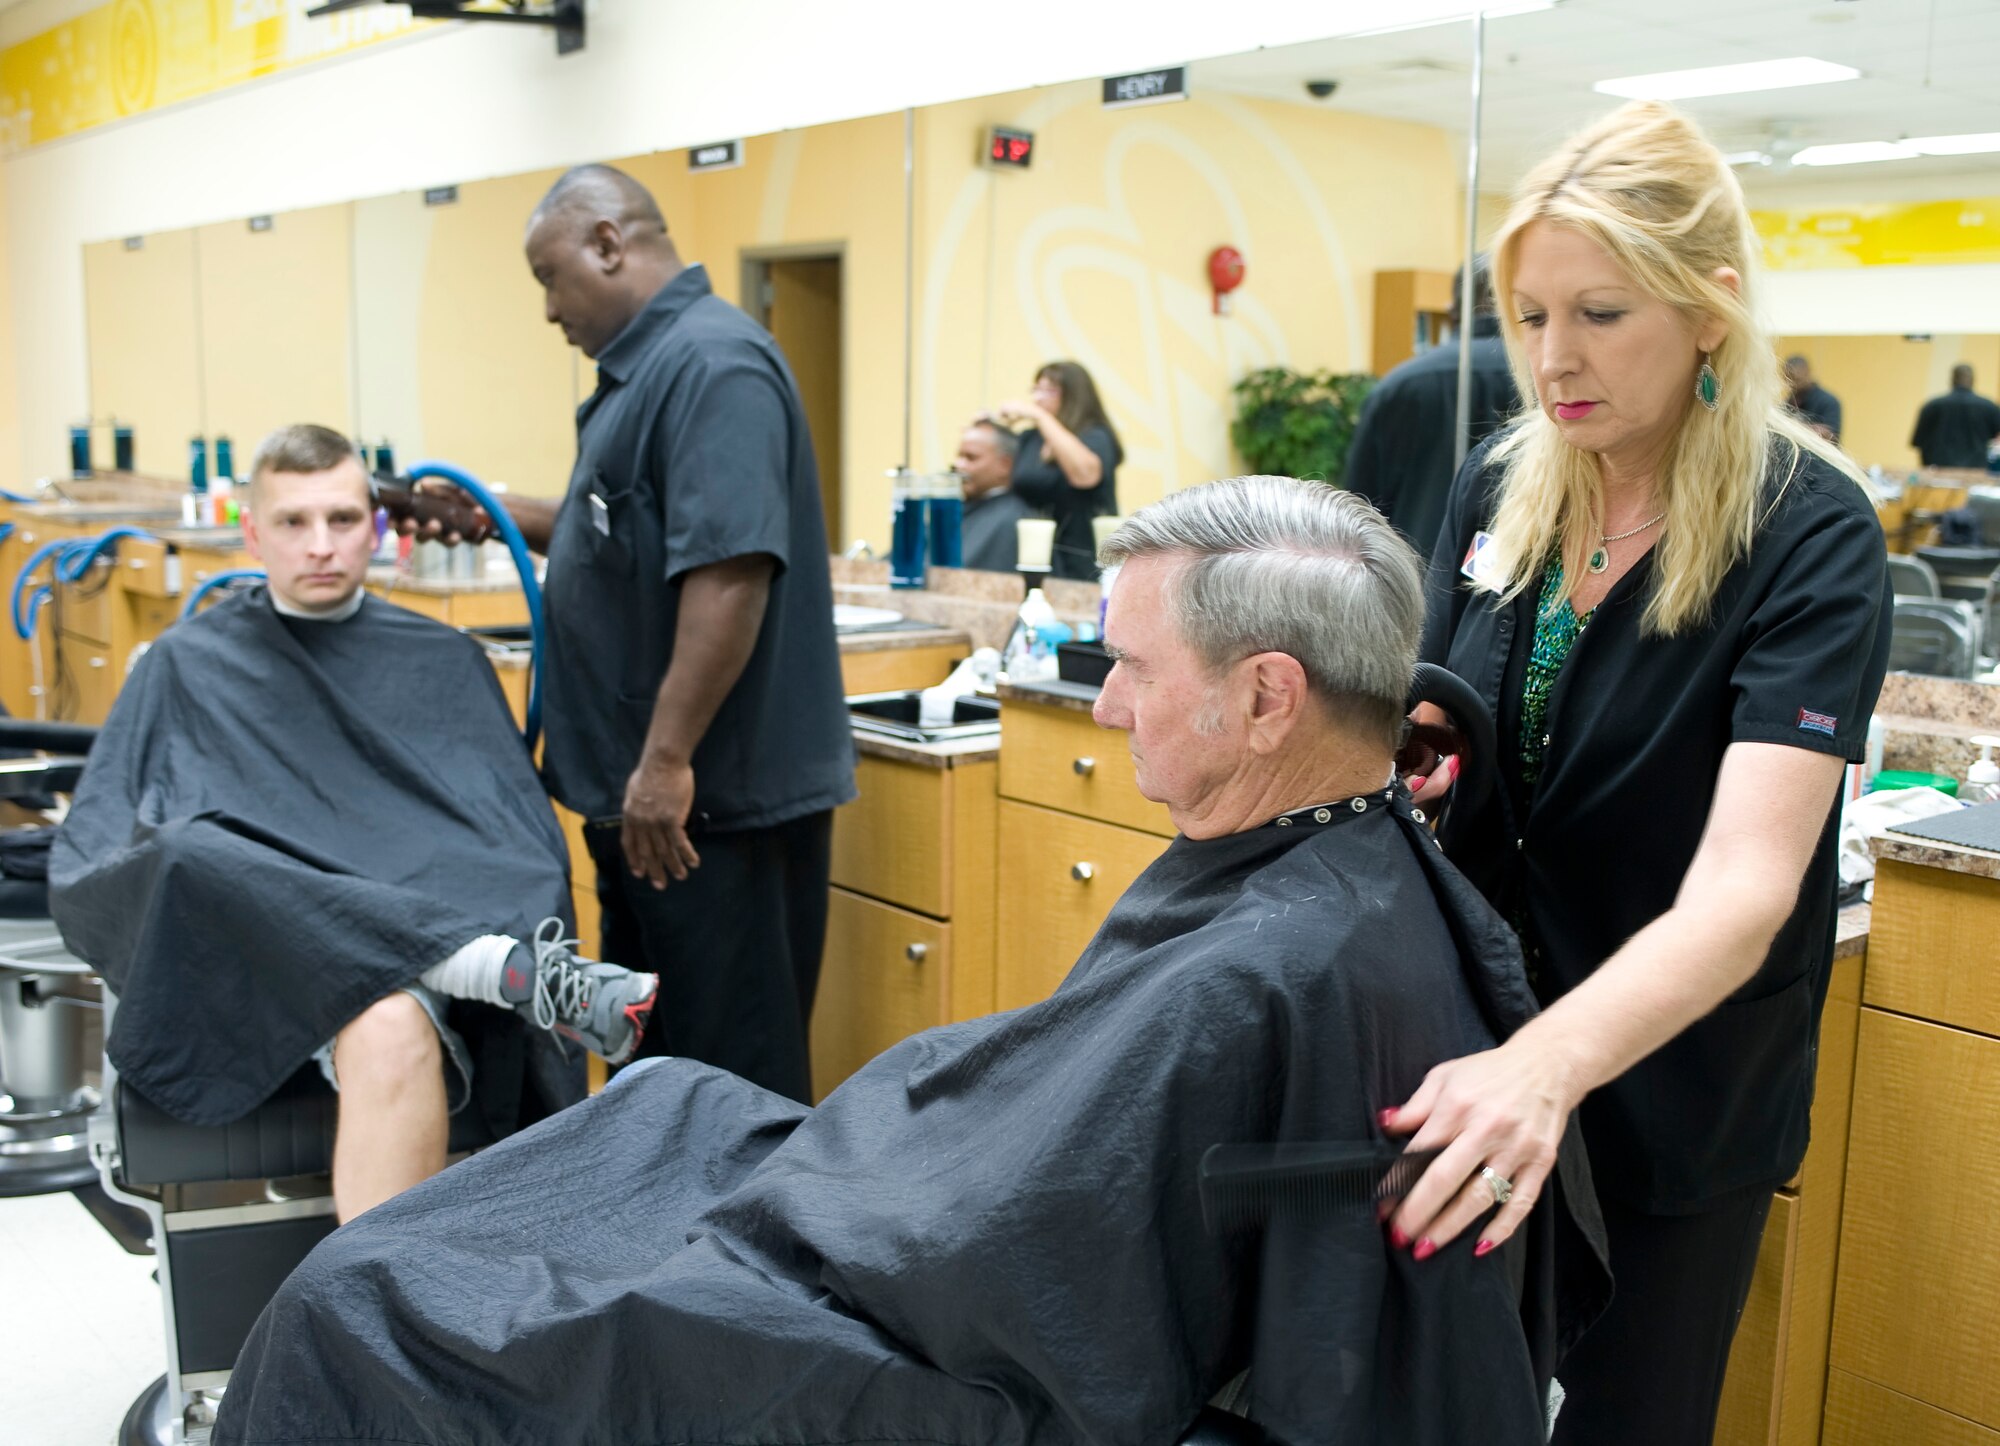 Henry Moseley and Debbie Savu give haircuts at the main barbershop in the Base Exchange on Barksdale Air Force Base, La., July 7. The barbershop gives several hundred haircuts each week to service members and their families. (U.S. Air Force photo by Senior Airman Chad Warren)(RELEASED)